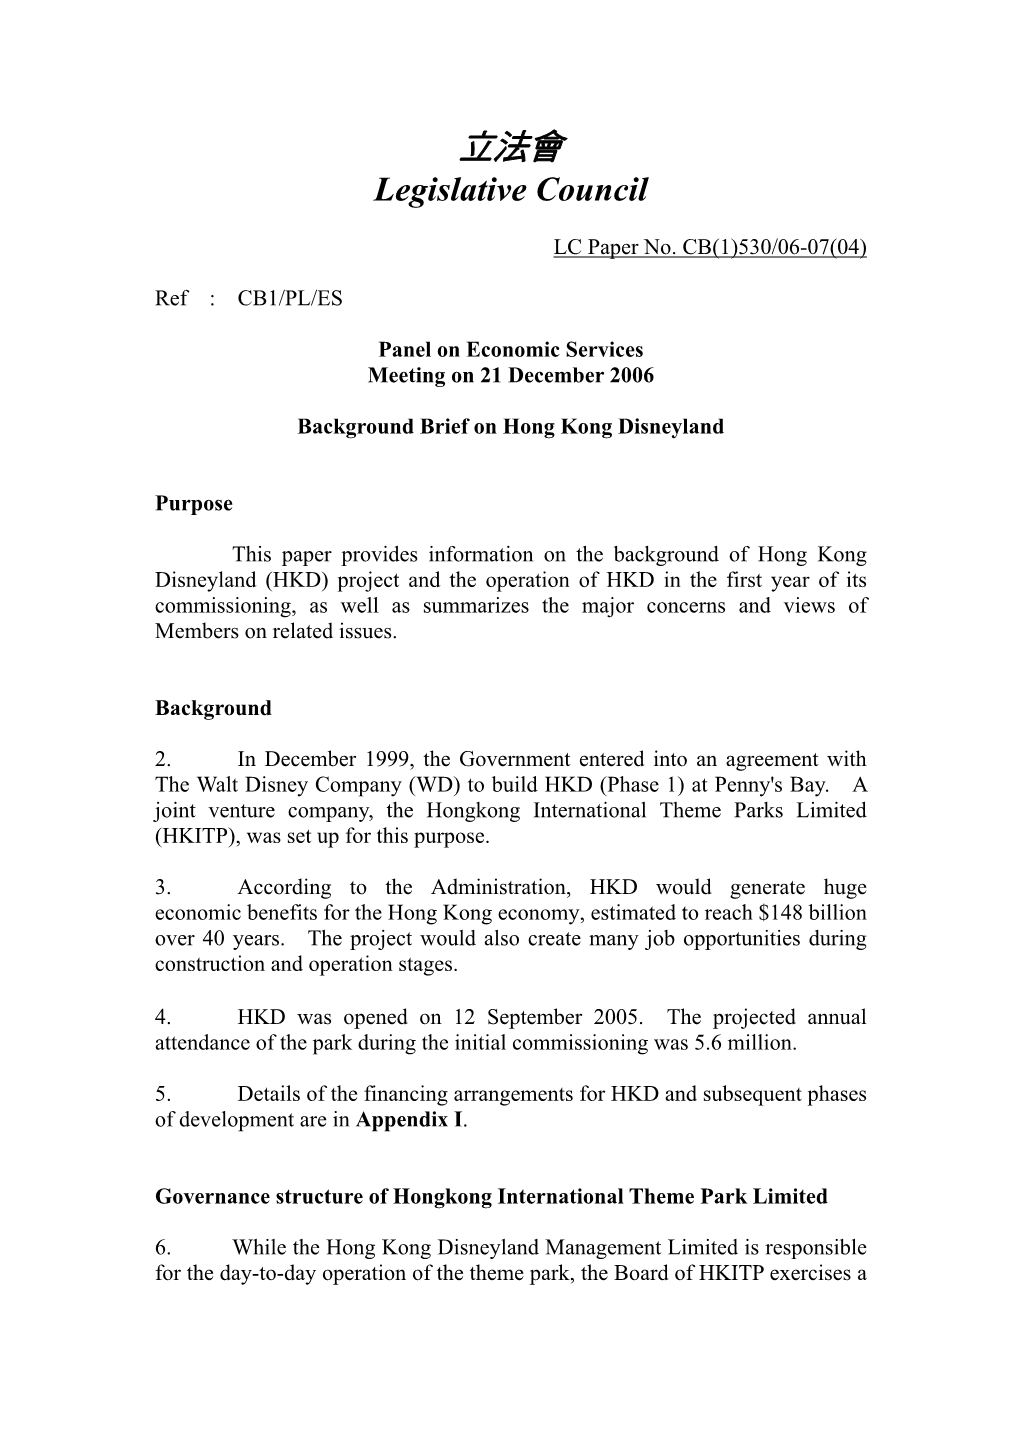 Background Brief on Hong Kong Disneyland Prepared by the Legco Secretariat (LC Paper No